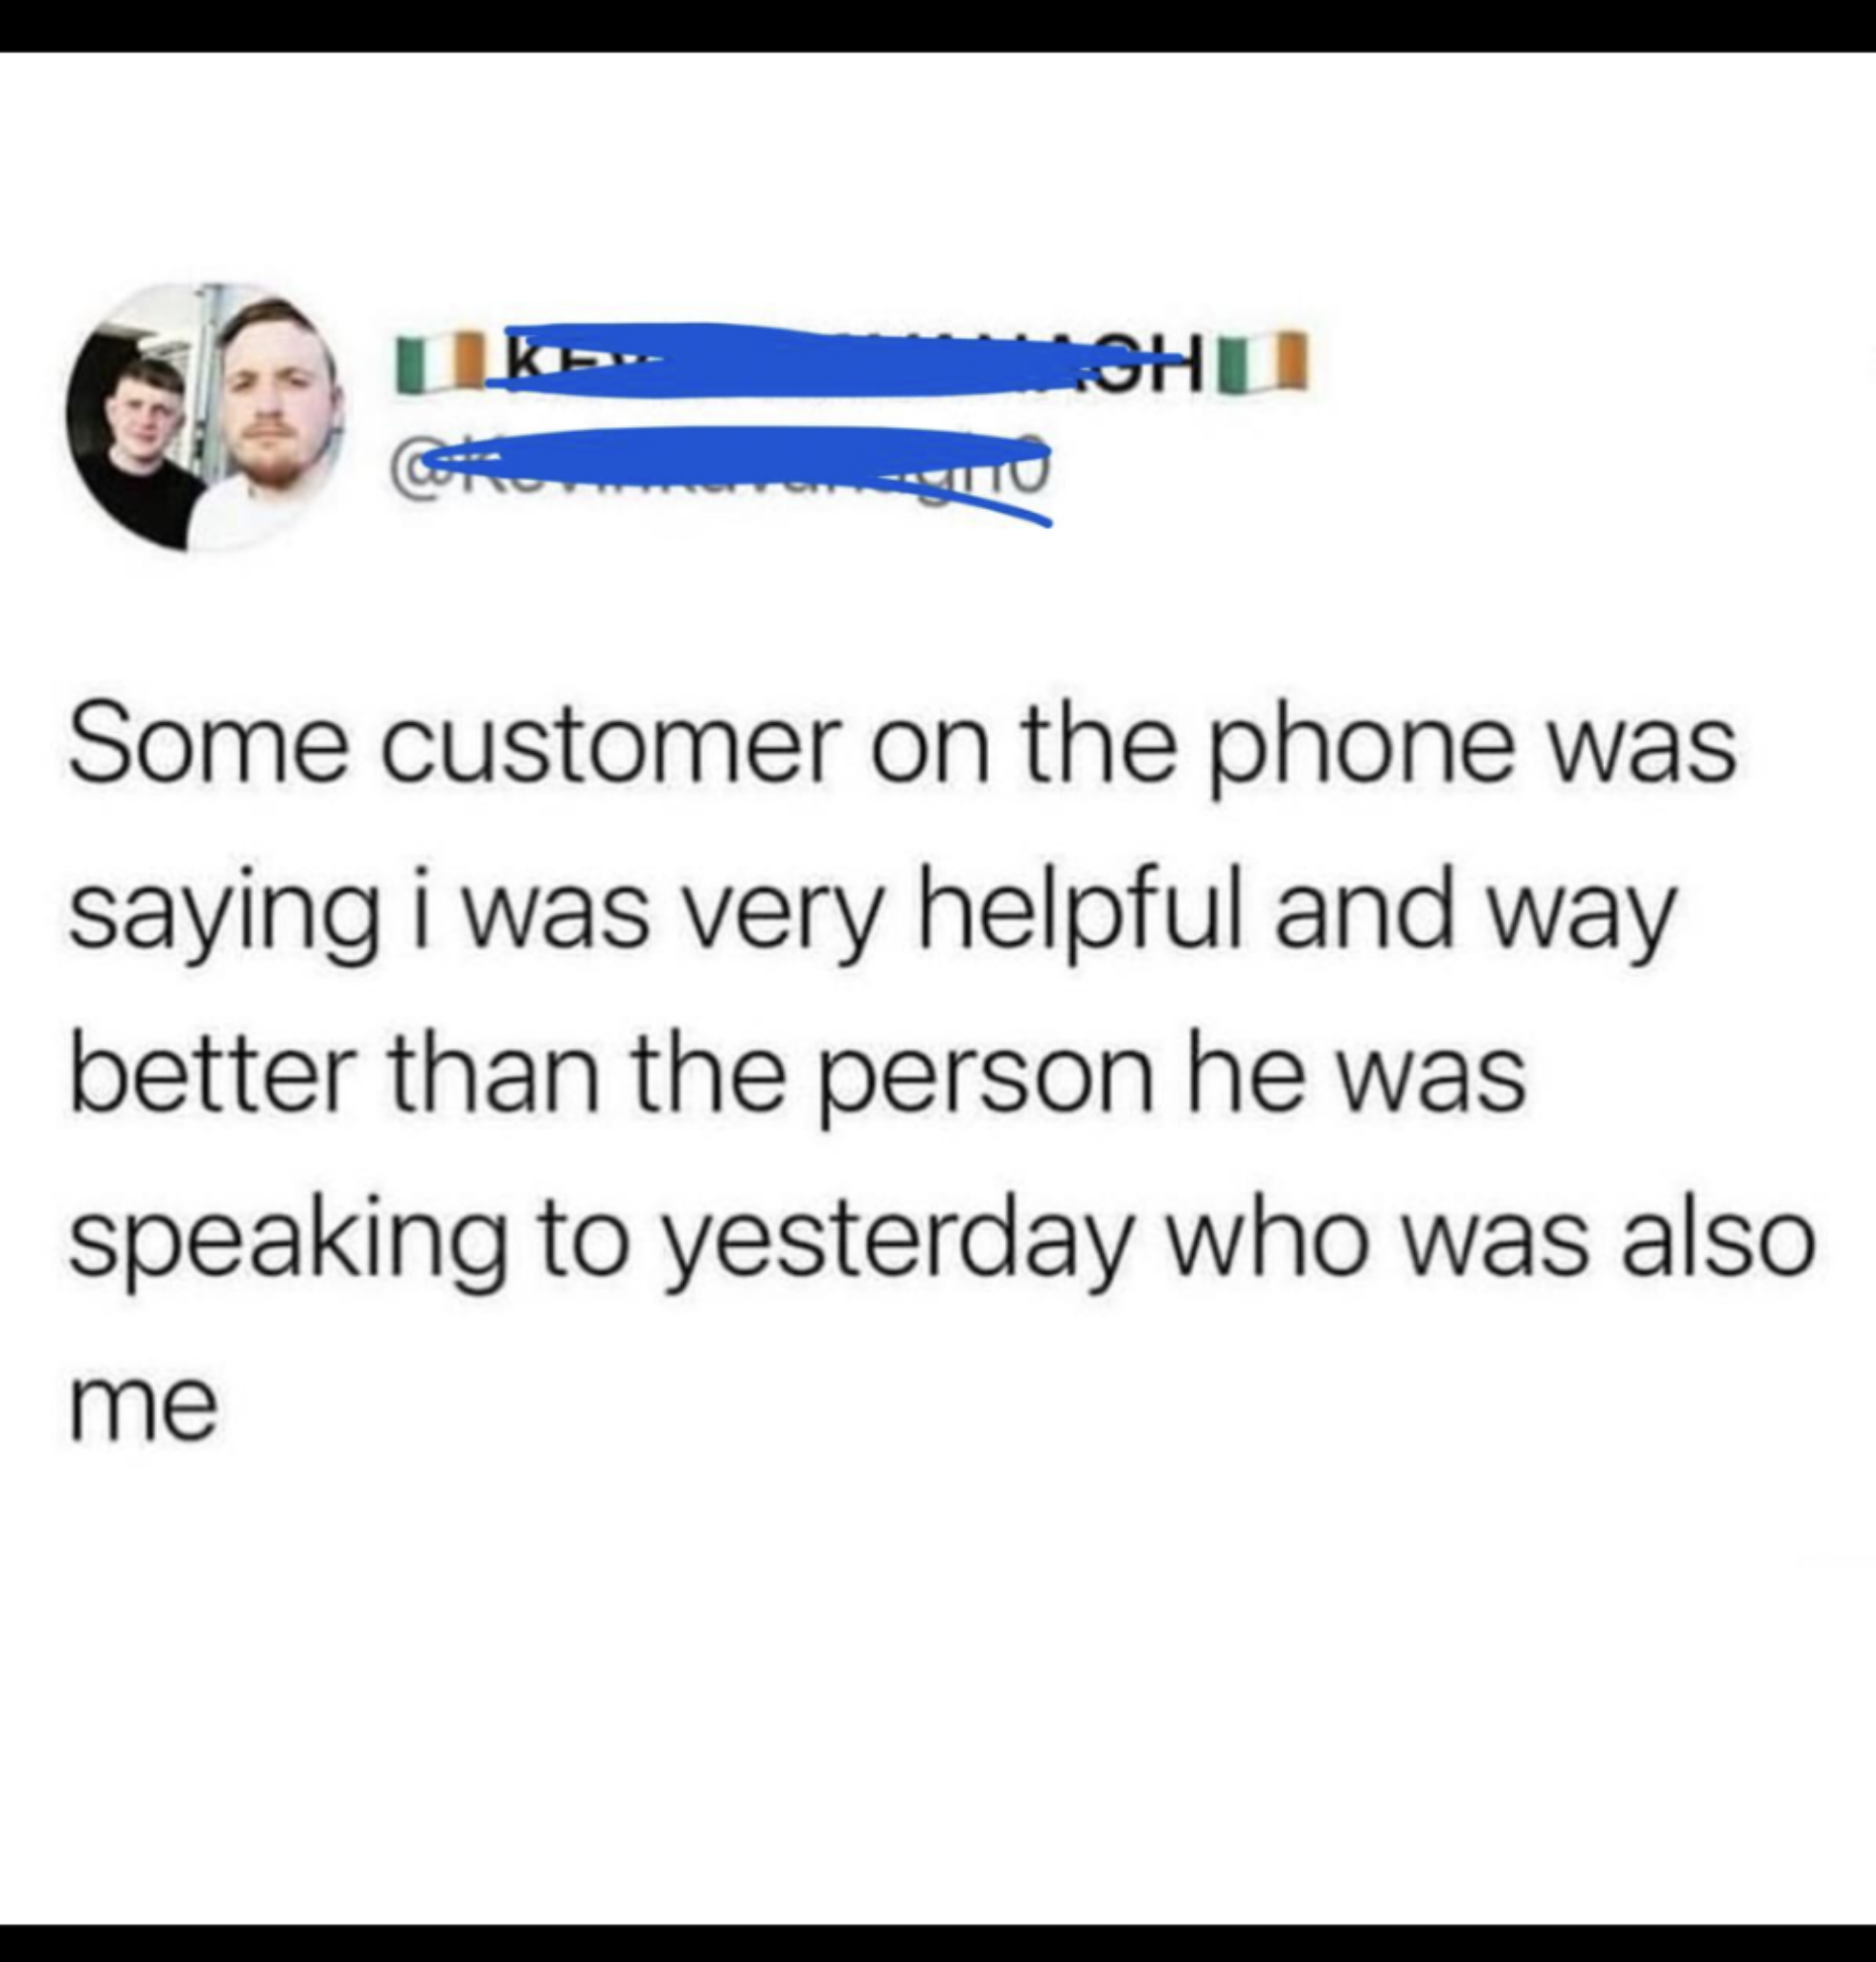 dank memes - paper - Kohu Some customer on the phone was saying i was very helpful and way better than the person he was speaking to yesterday who was also me